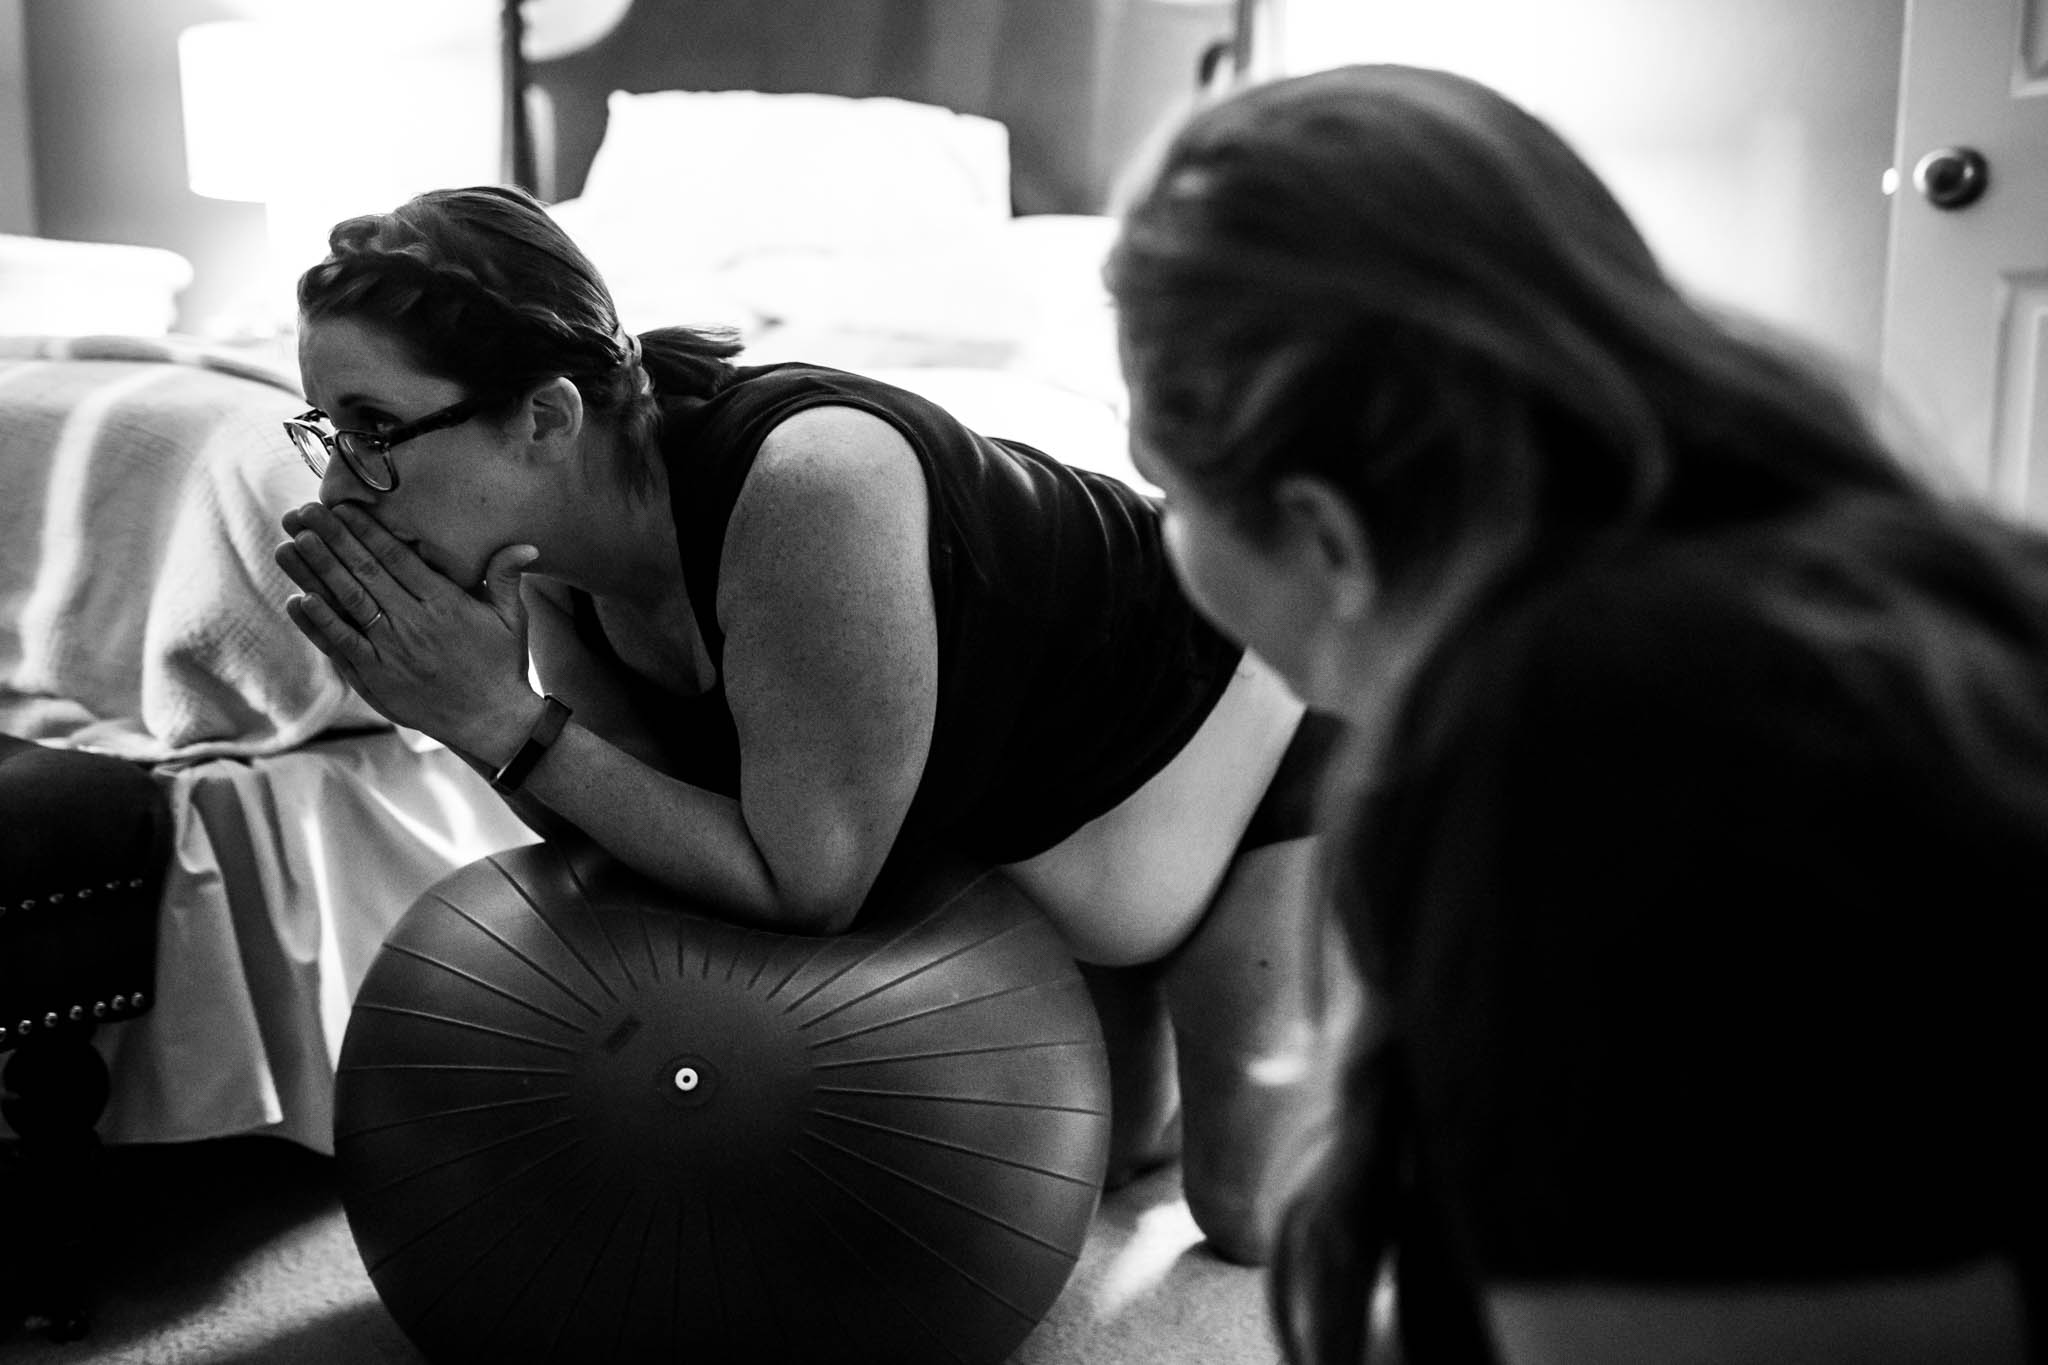 Lawren Rose Photography takes a photograph of a doula watching her laboring client during a home birth in Denton, Texas